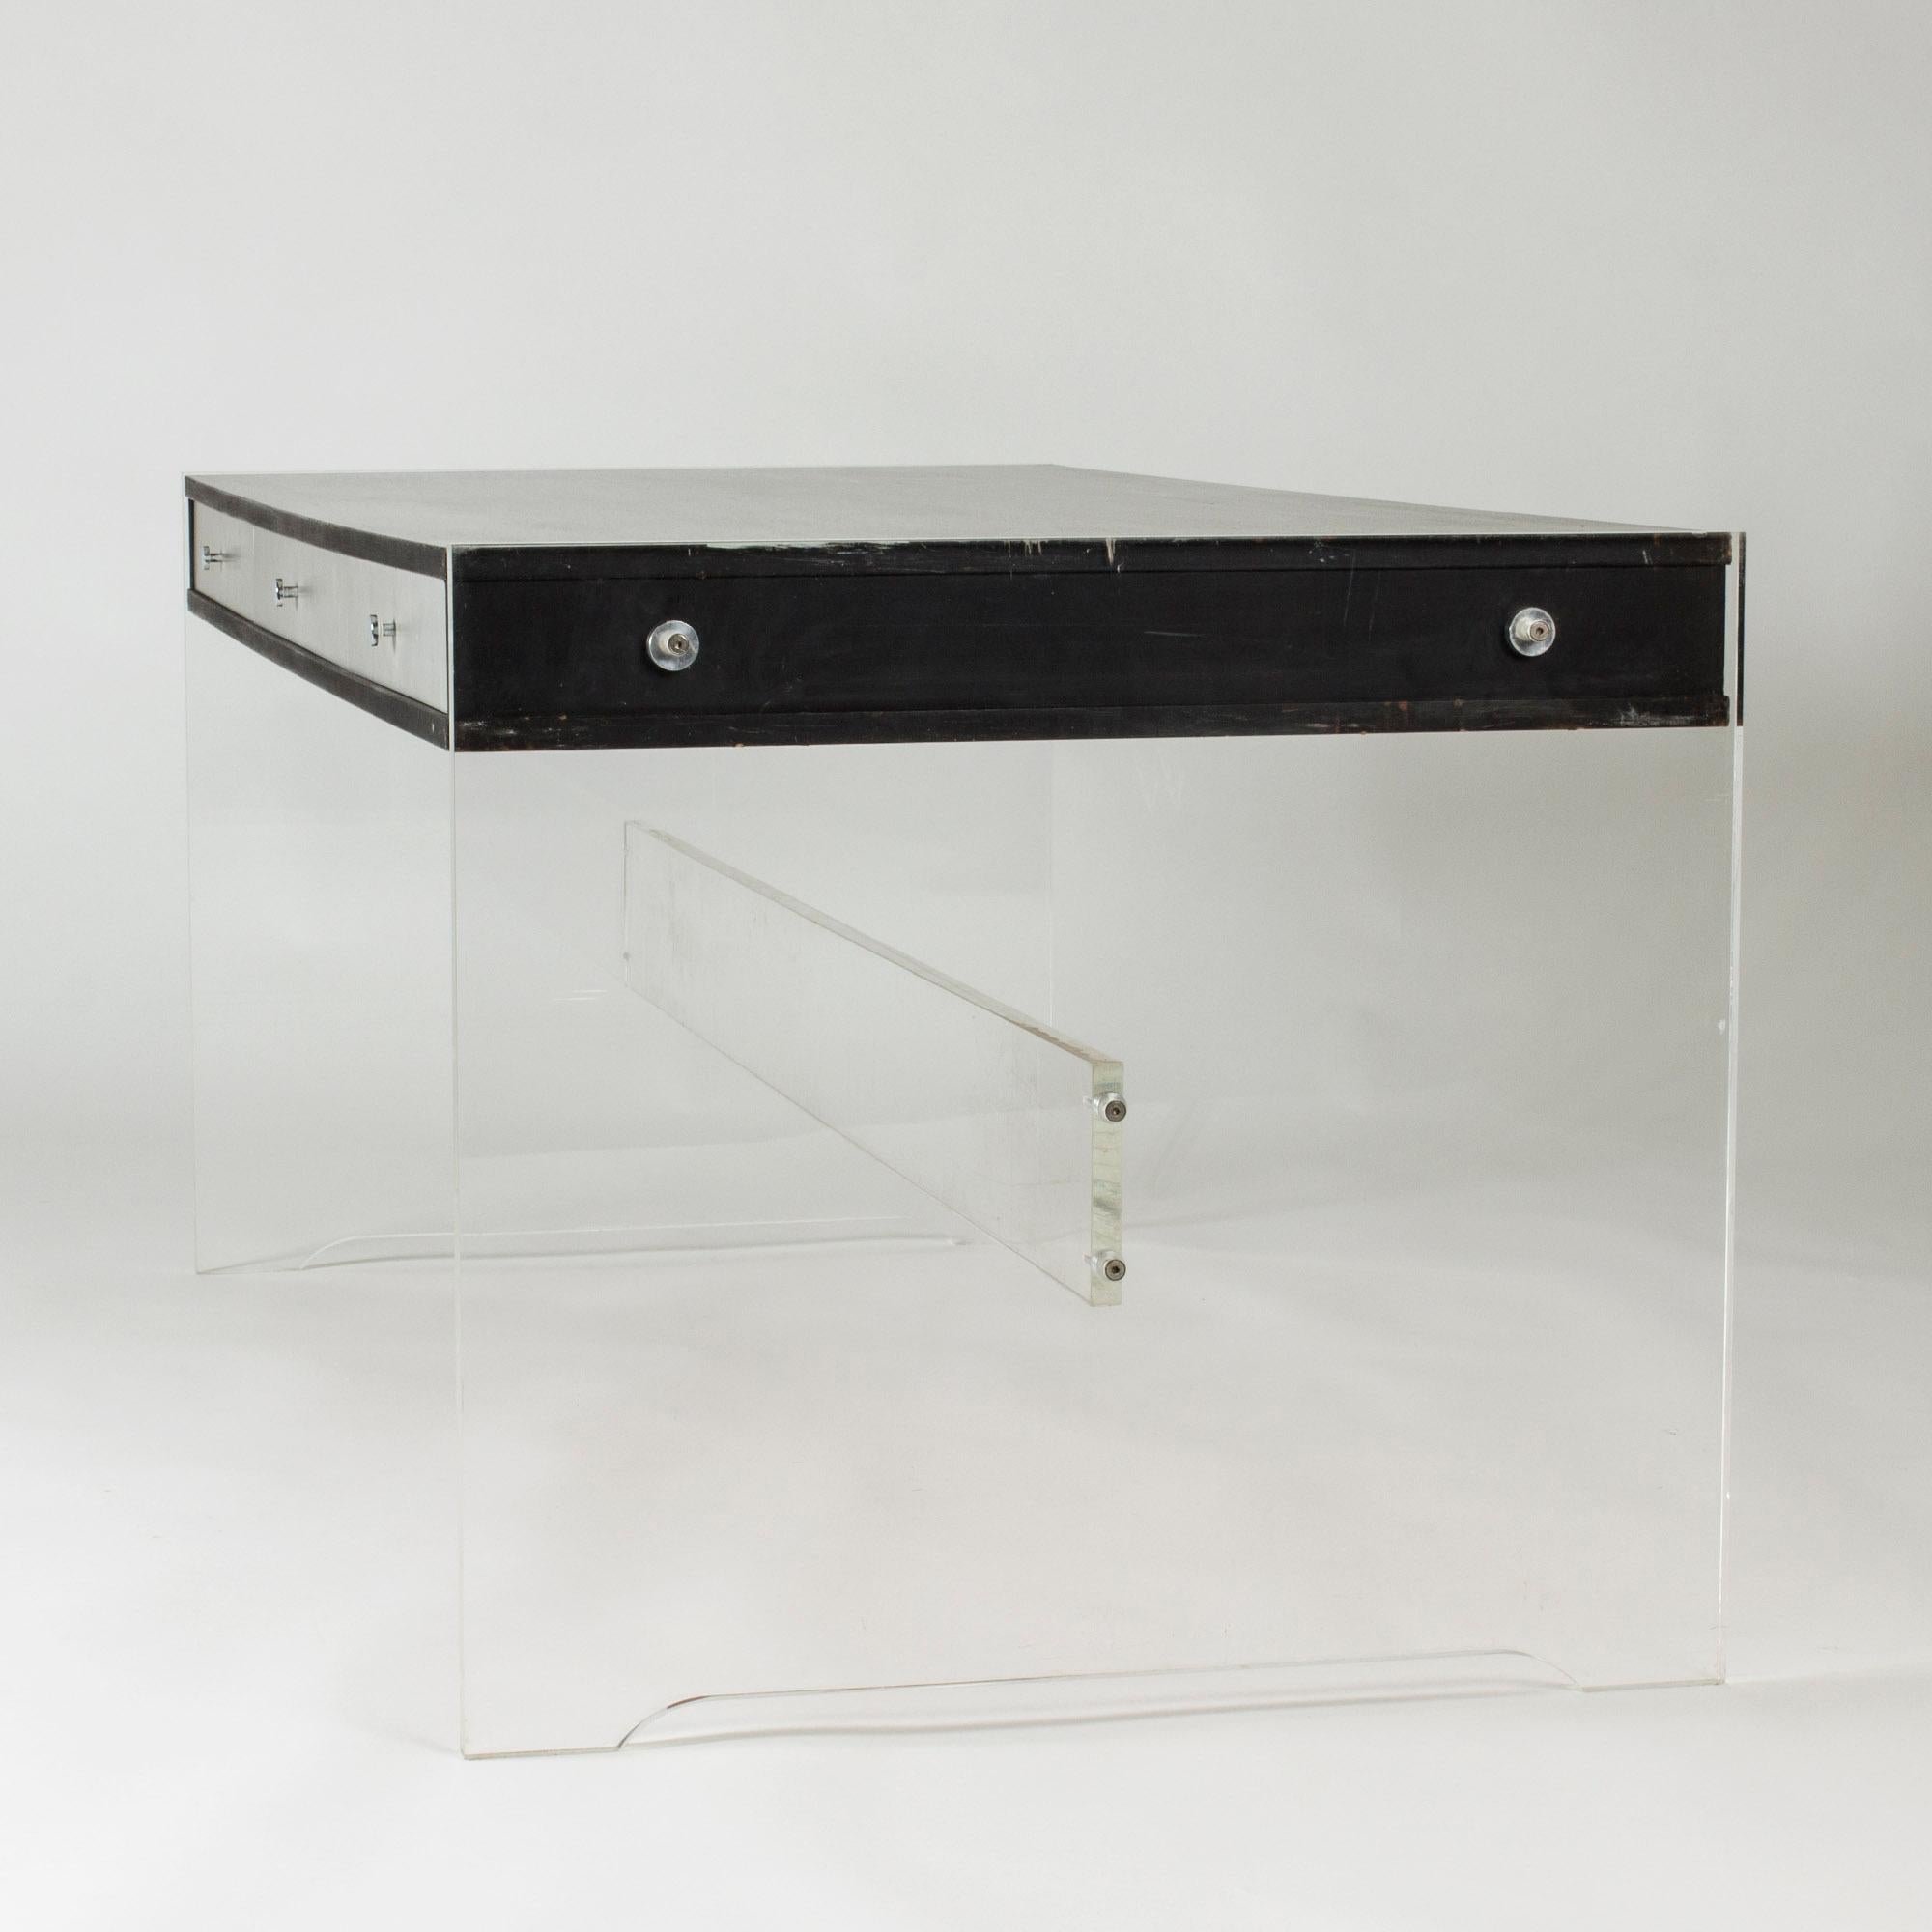 Striking desk by Poul Nørreklit, made from plexi glass with a lacquered wood table top and drawers. Thick, translucent sides, a boxy design with an airy expression.